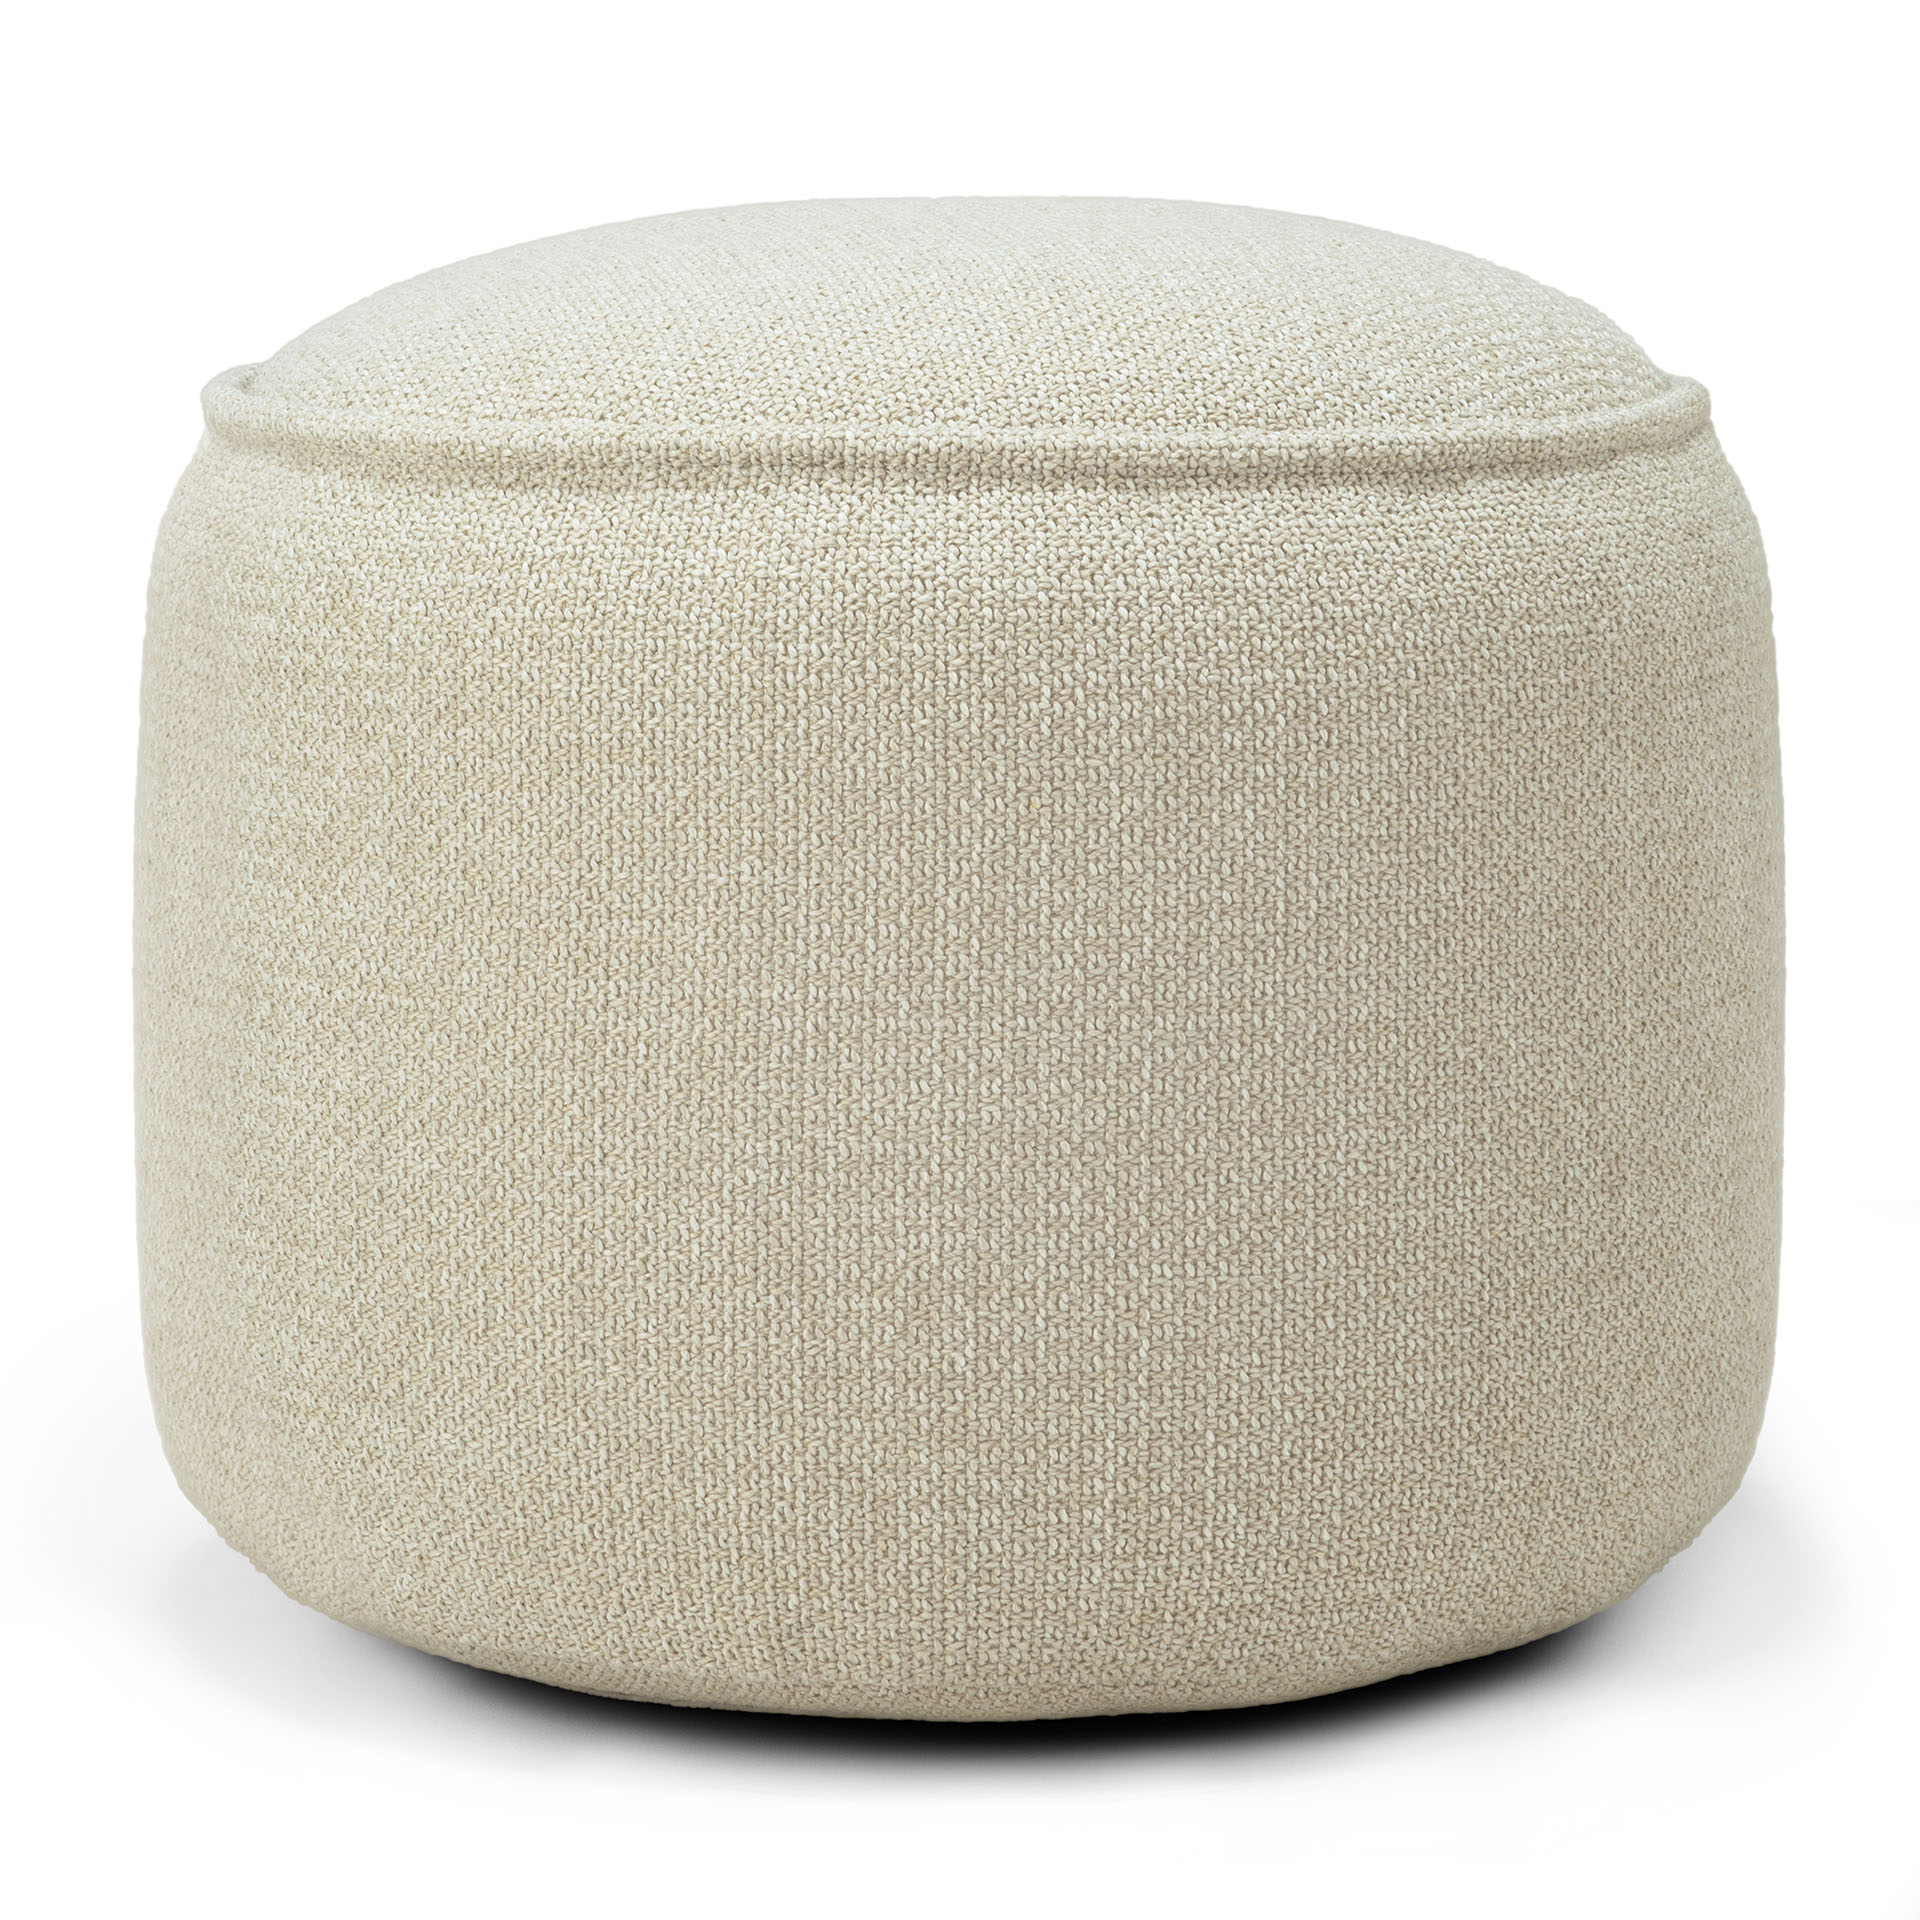 20069_Donut_outdoor_pouf_checked_natural_front_cut_web